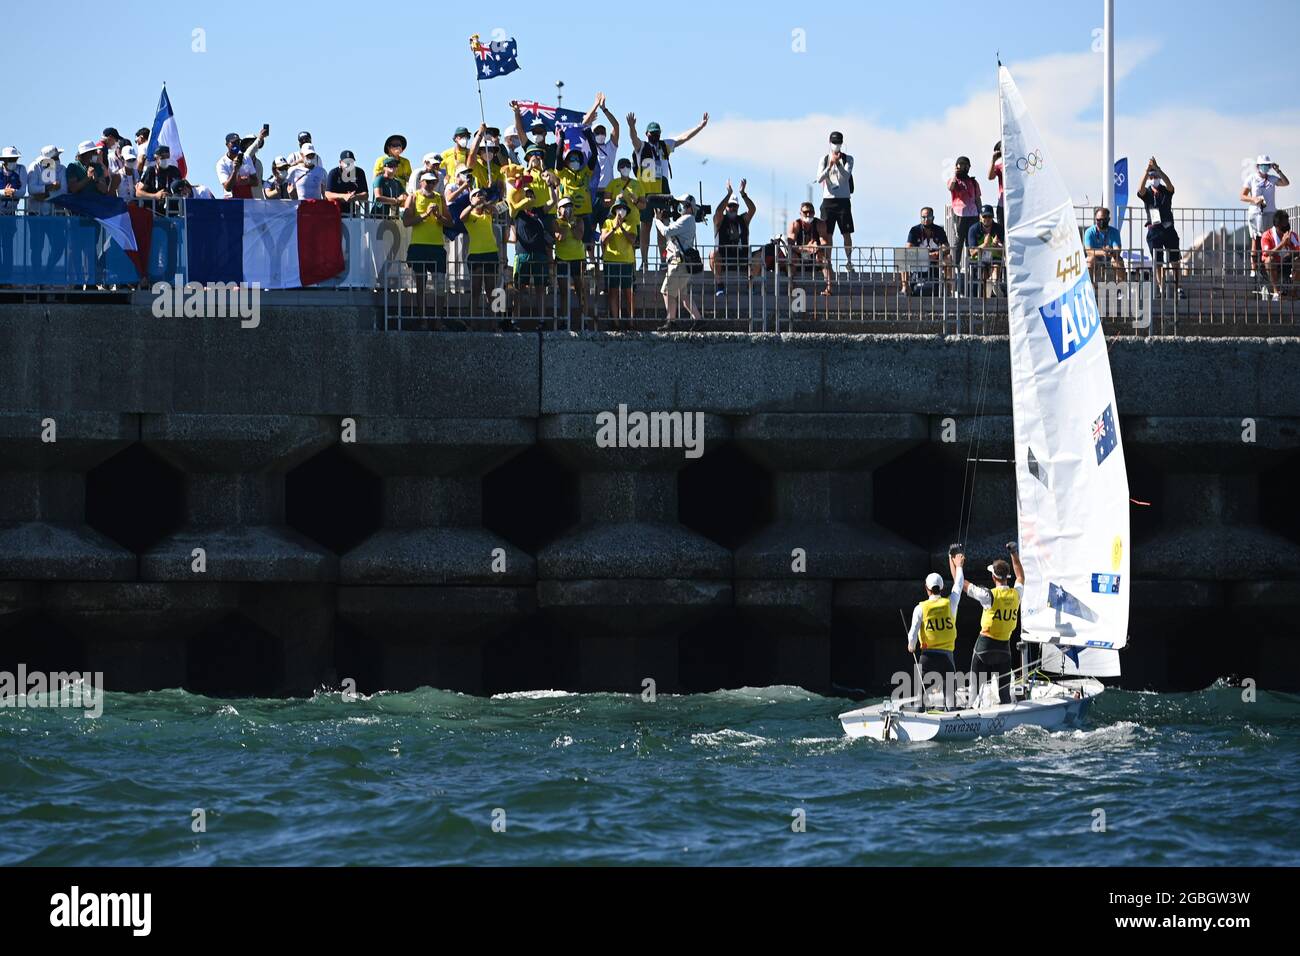 Kanagawa, Japan. 4th Aug, 2021. Mathew Belcher/Will Ryan of Australia celebrate after the sailing men's two person dinghy 470 medal race at the Tokyo 2020 Olympic Games in Kanagawa, Japan, Aug. 4, 2021. Credit: Huang Zongzhi/Xinhua/Alamy Live News Stock Photo